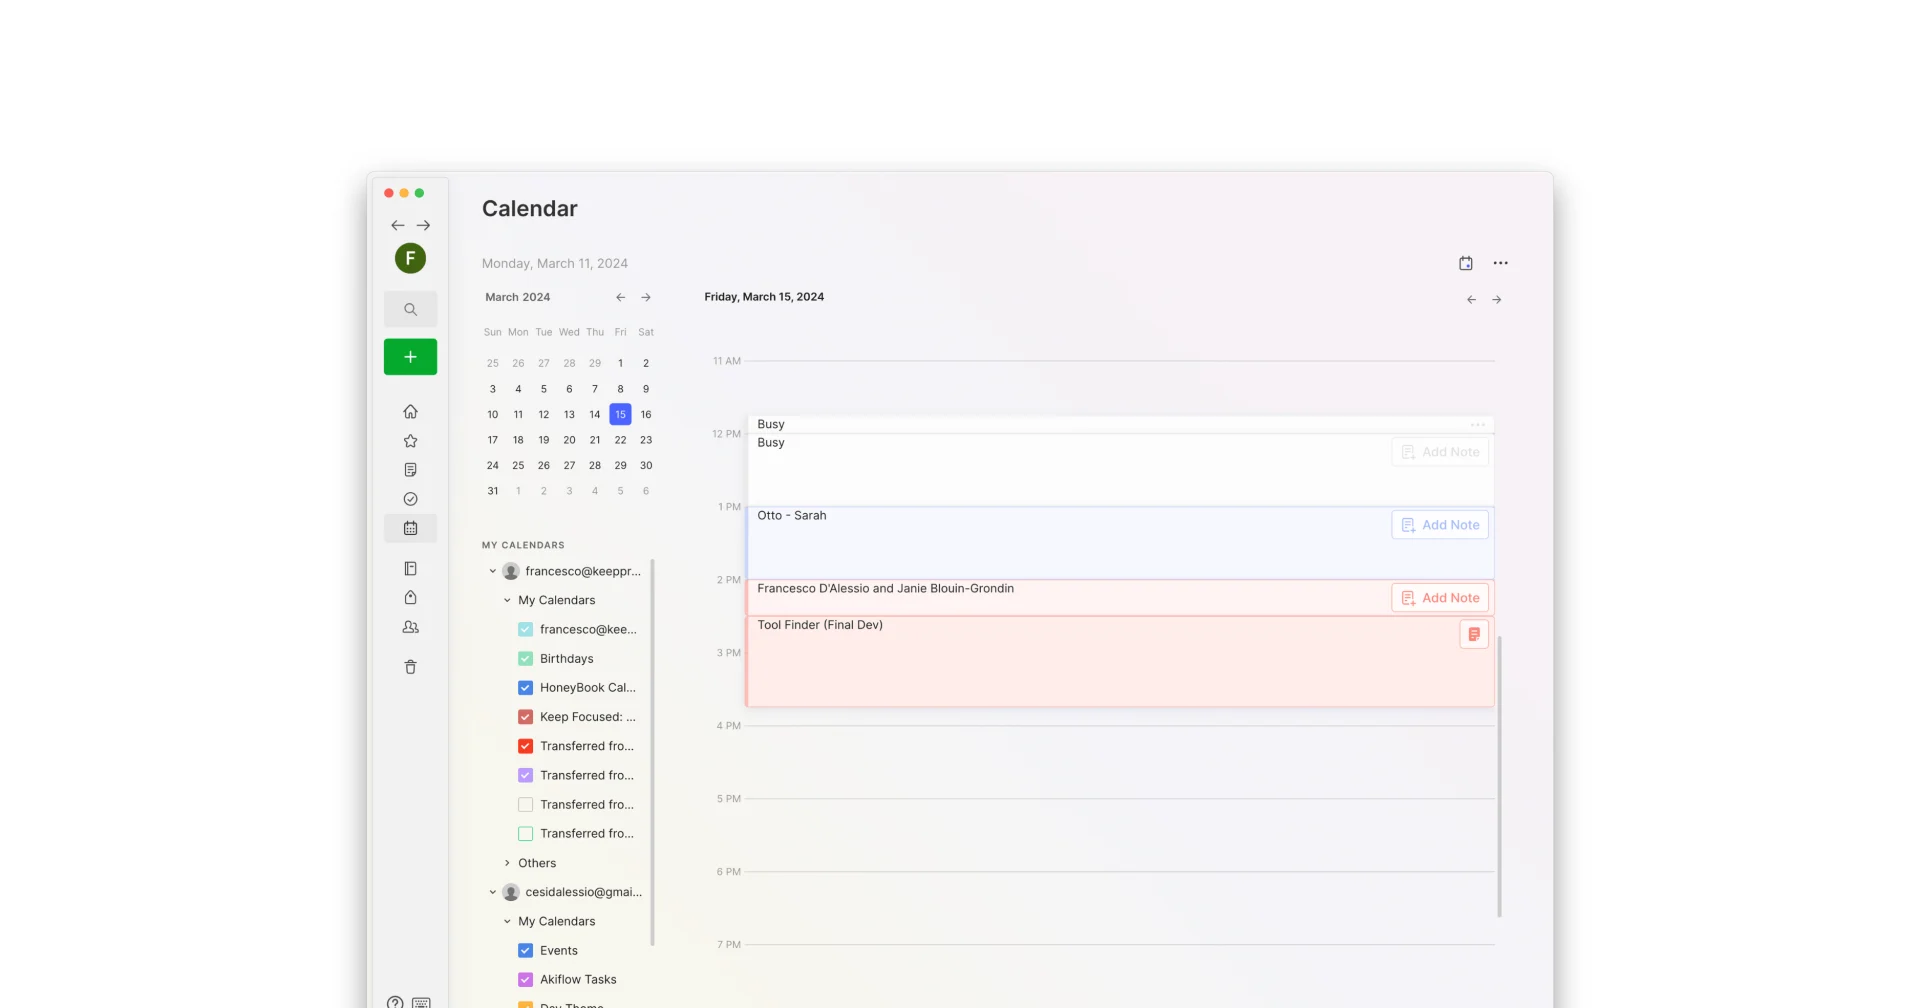 Evernote Calendar Announcement, March 11th